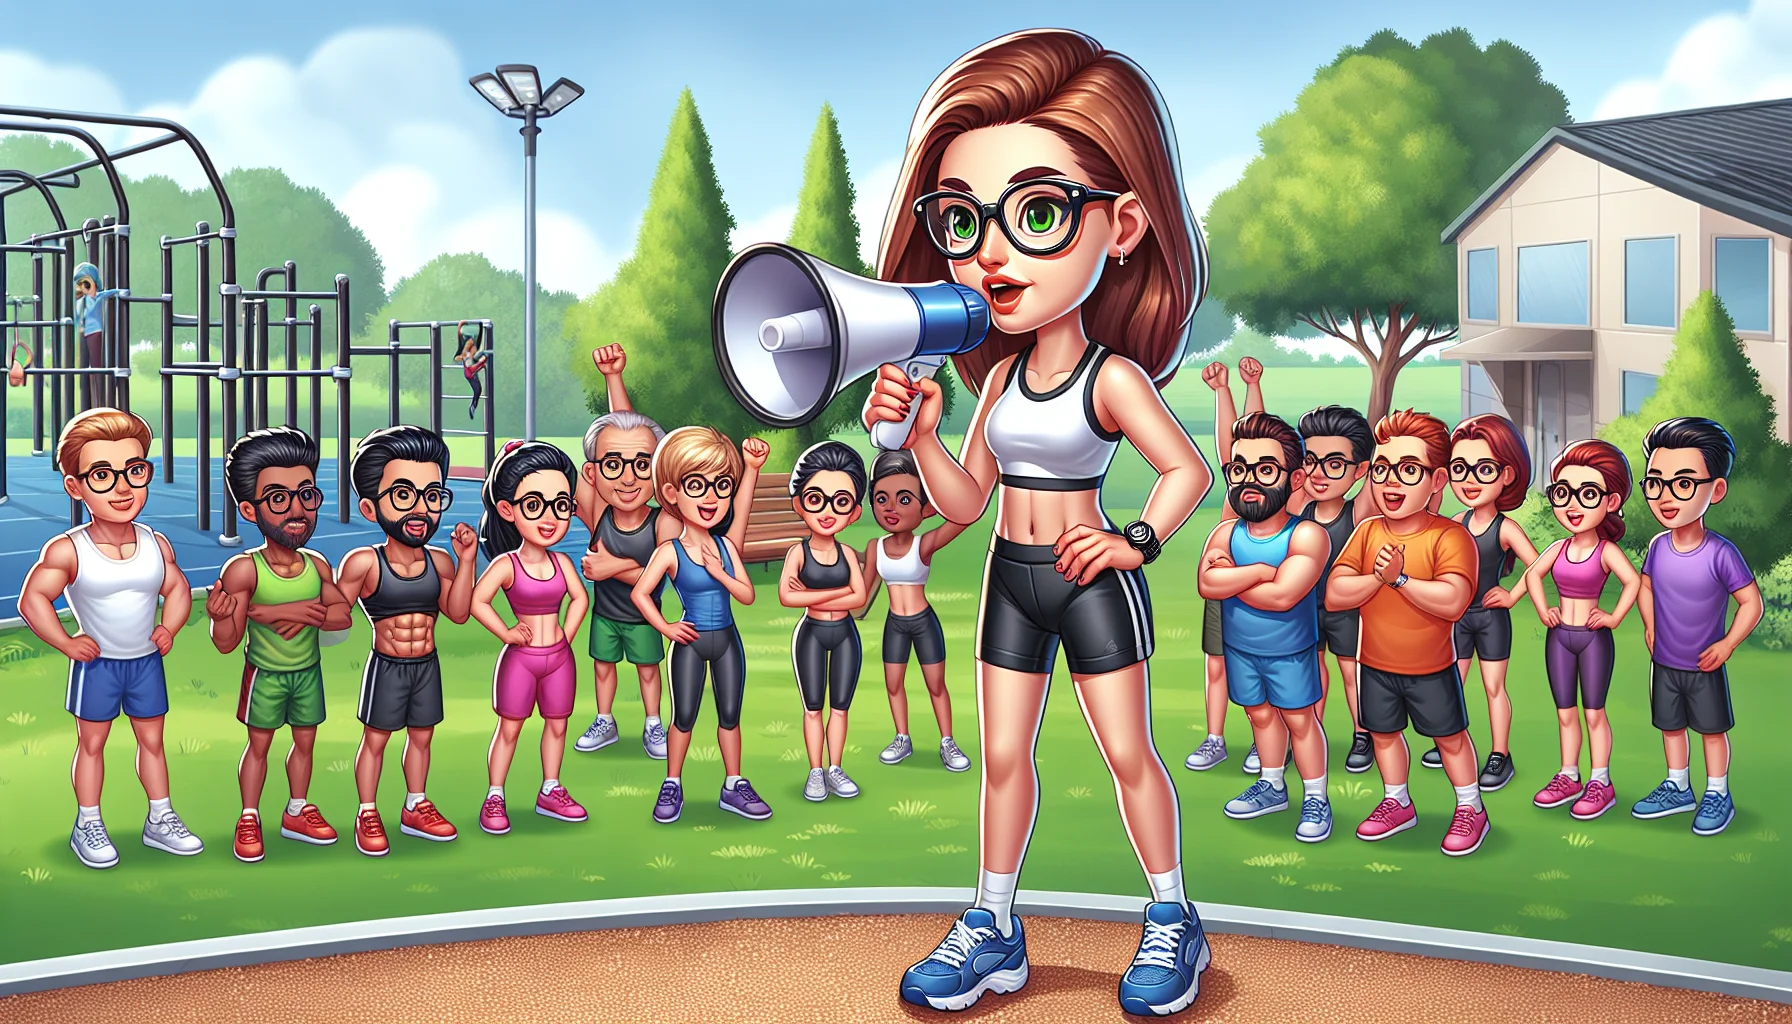 Illustrate a humorous fitness scenario with a female public figure with a petite physique, inspiring people to engage in physical exercise. She has brunette hair and wears glasses. She is seen wearing sporting attire with sneakers and holding a megaphone, encouraging a group of people from various ethnic backgrounds. The backdrop is well-equipped fitness park with trees and blue sky.